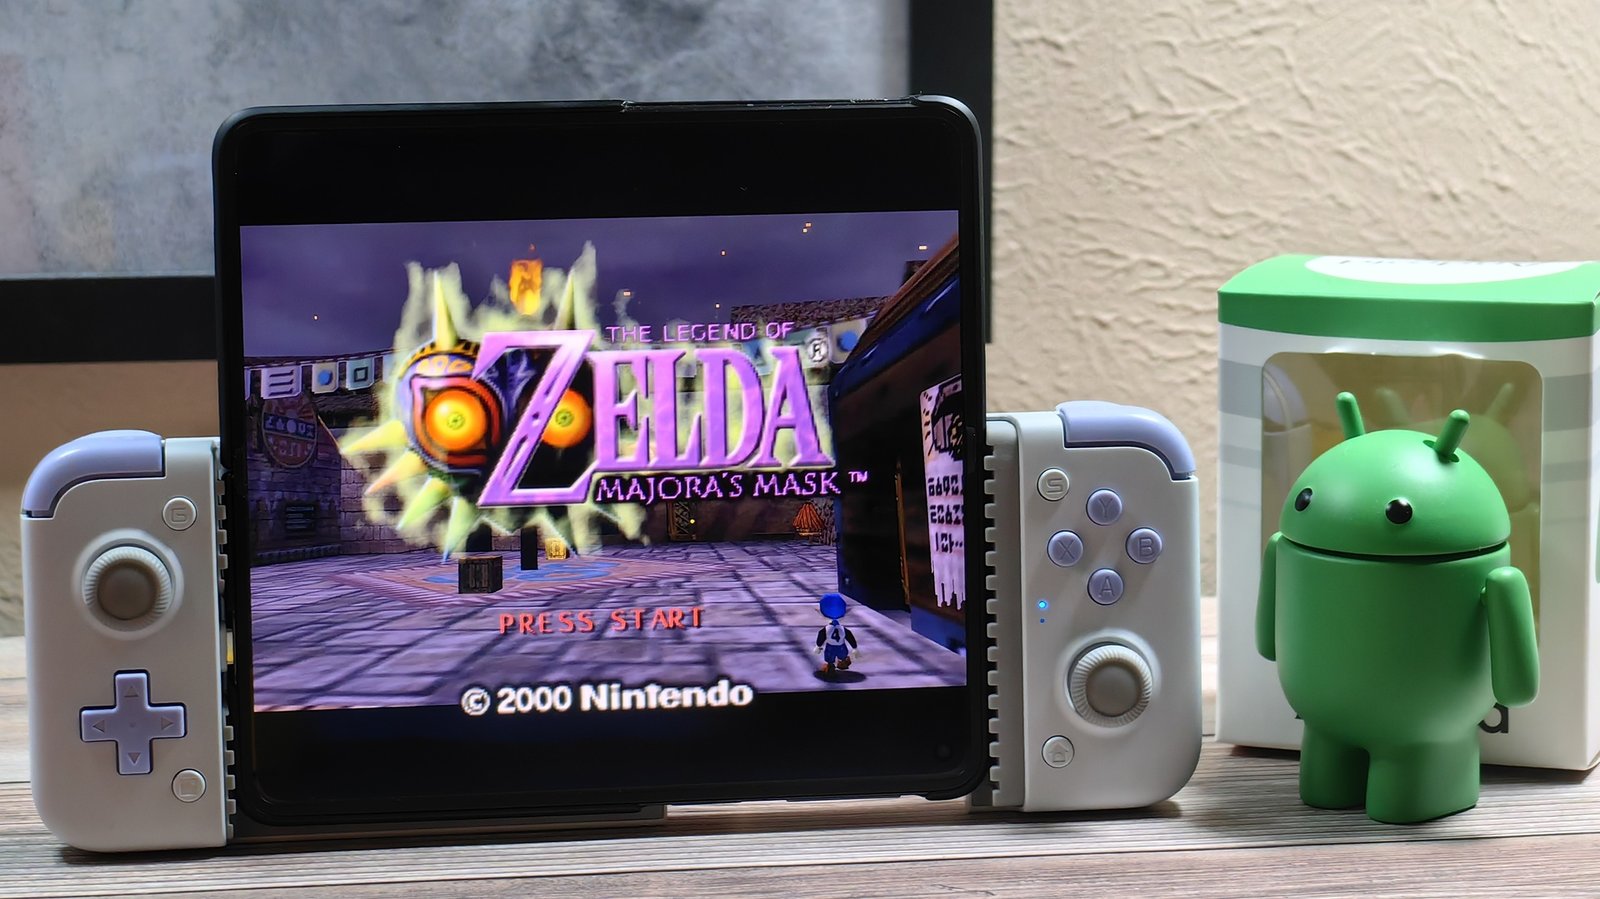 Majora’s Mask can now natively run on Android